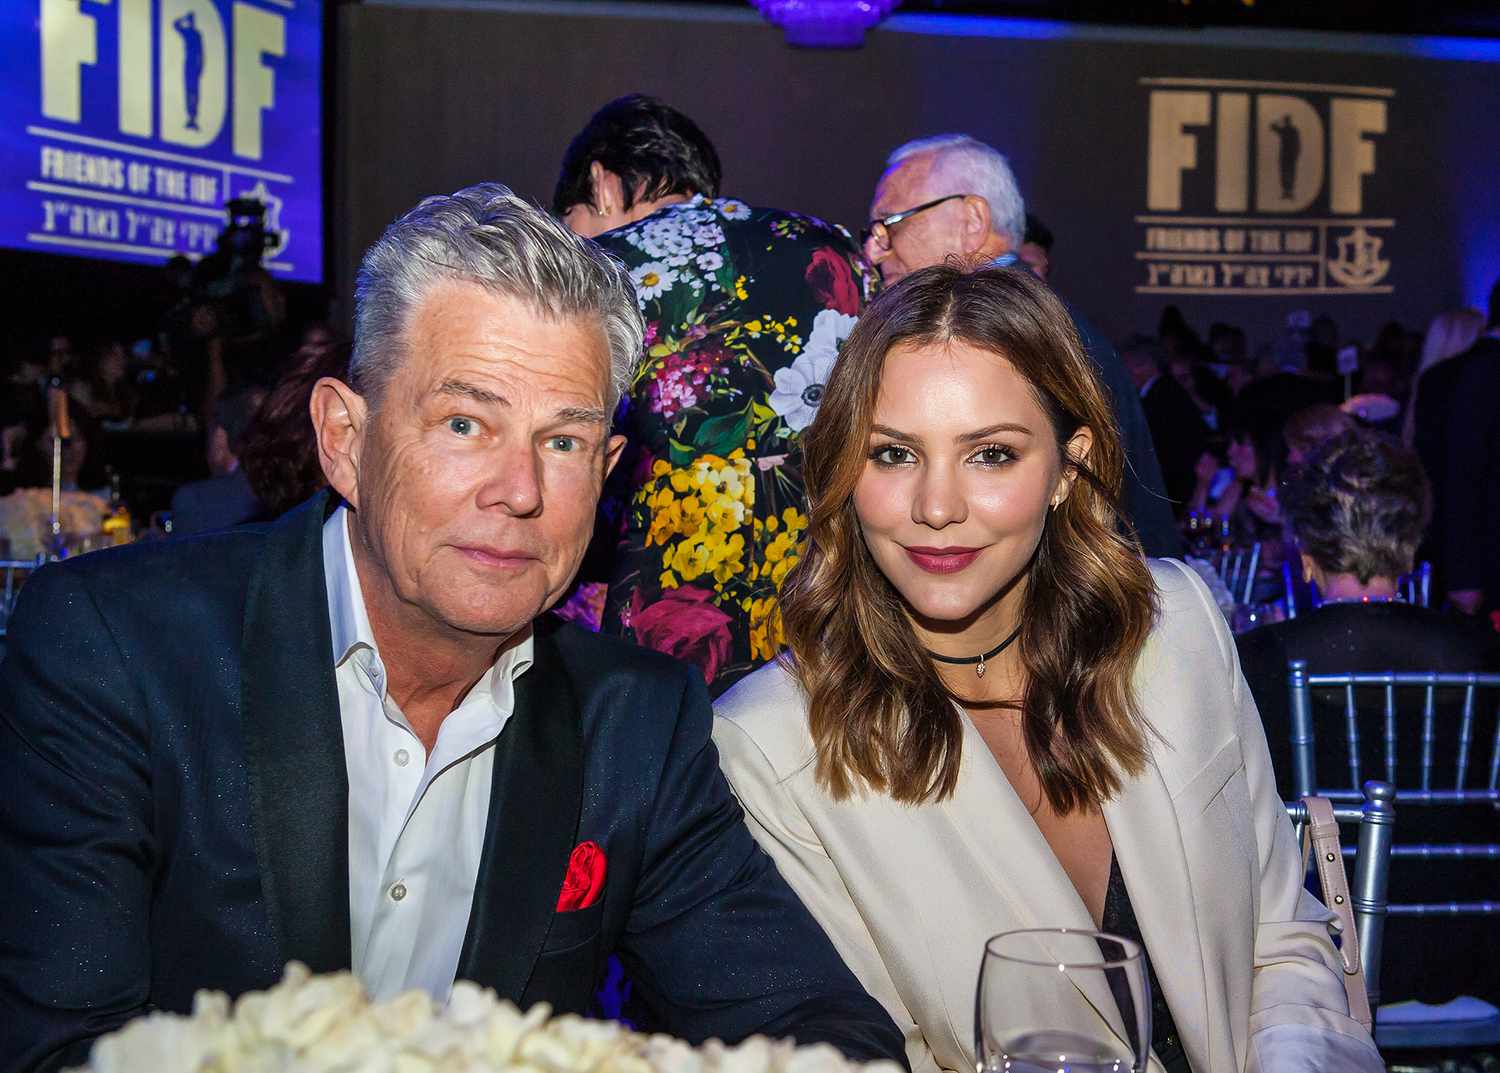 David Foster and Katherine McPhee attending the F.I.D.F. charity event